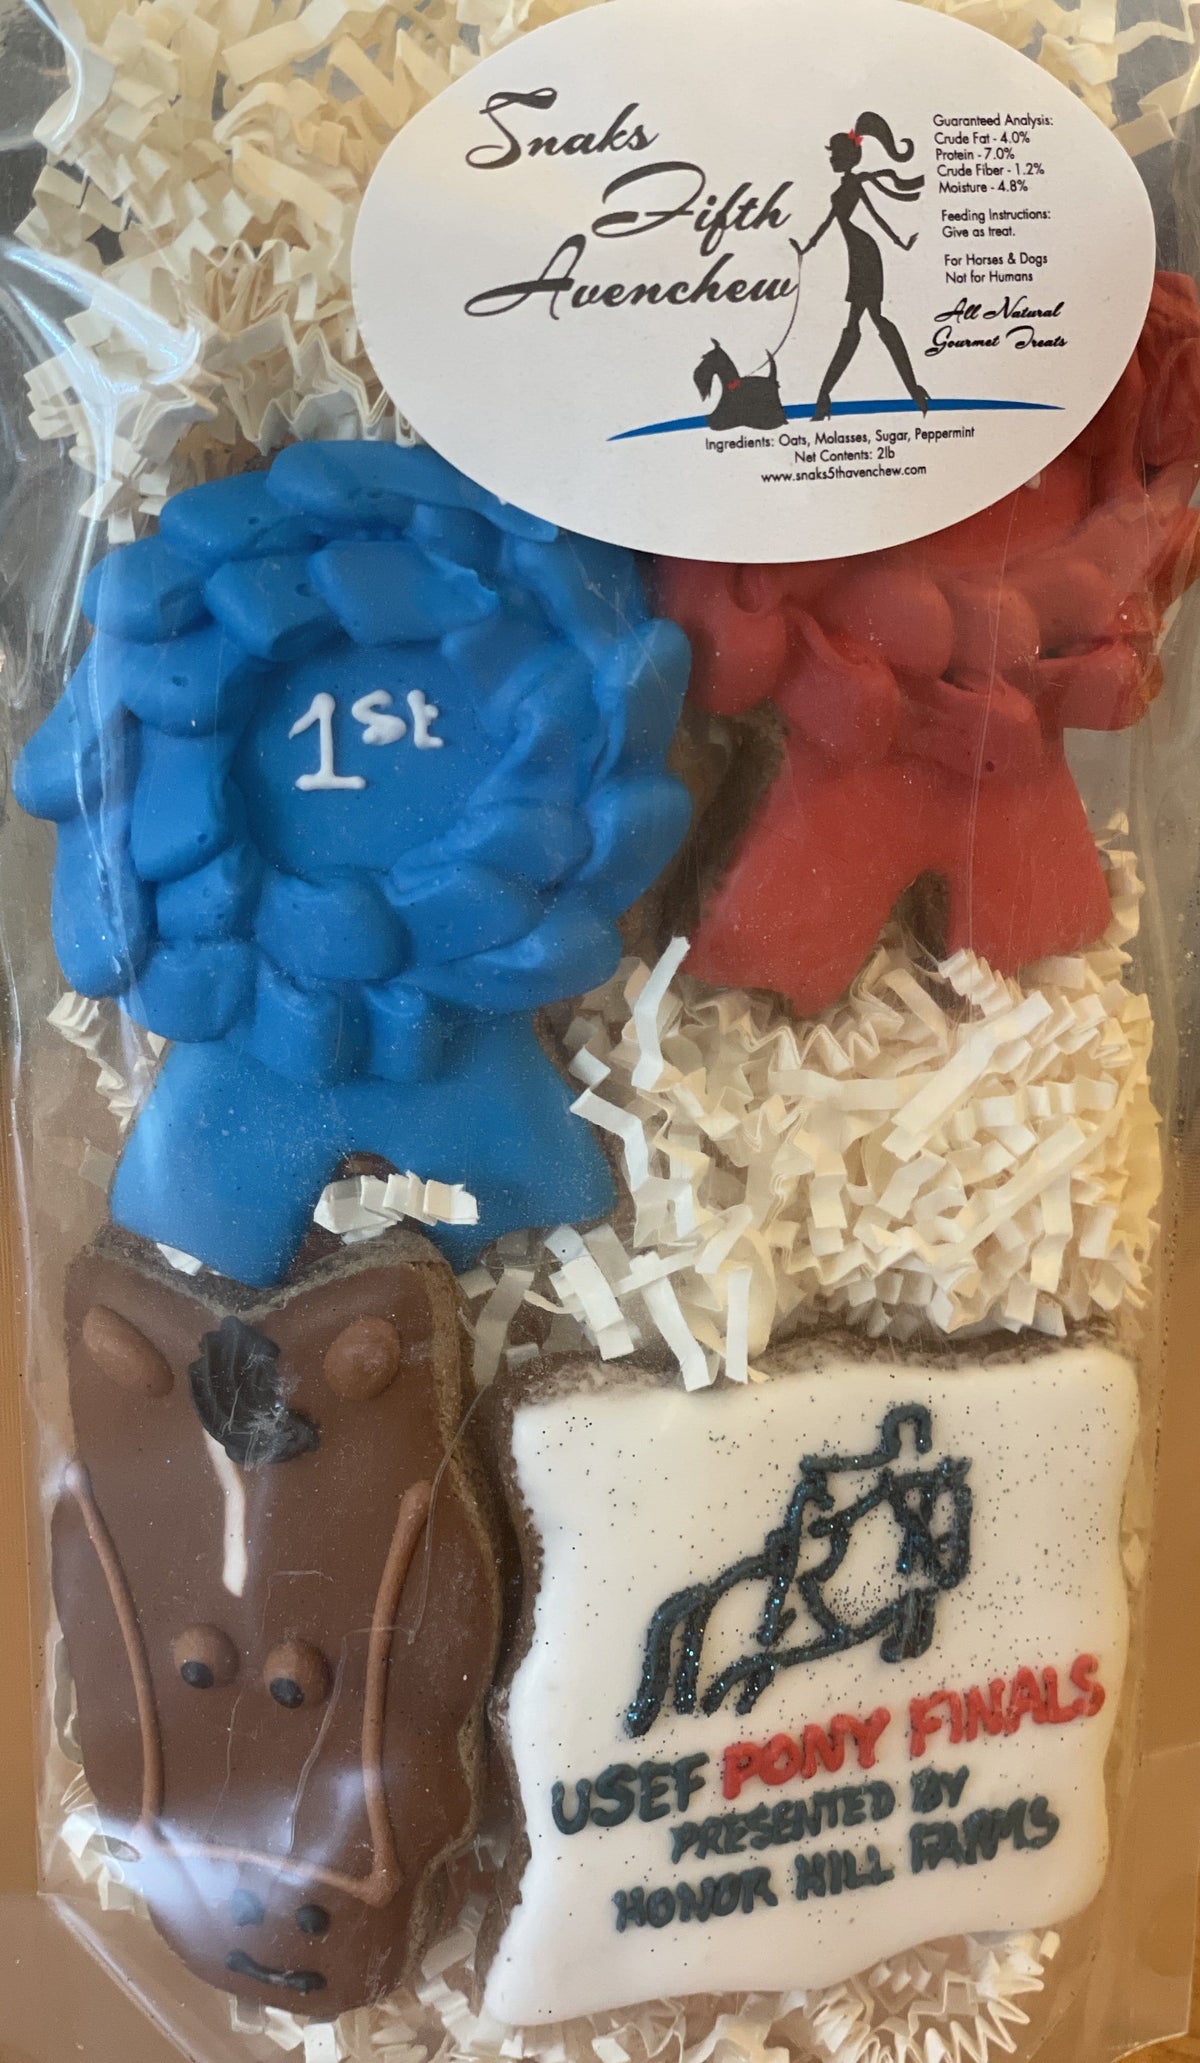 Snaks 5th Avenchew Treats 1-Pony 123 Pony Finals Snaks 5th Avenchew equestrian team apparel online tack store mobile tack store custom farm apparel custom show stable clothing equestrian lifestyle horse show clothing riding clothes horses equestrian tack store